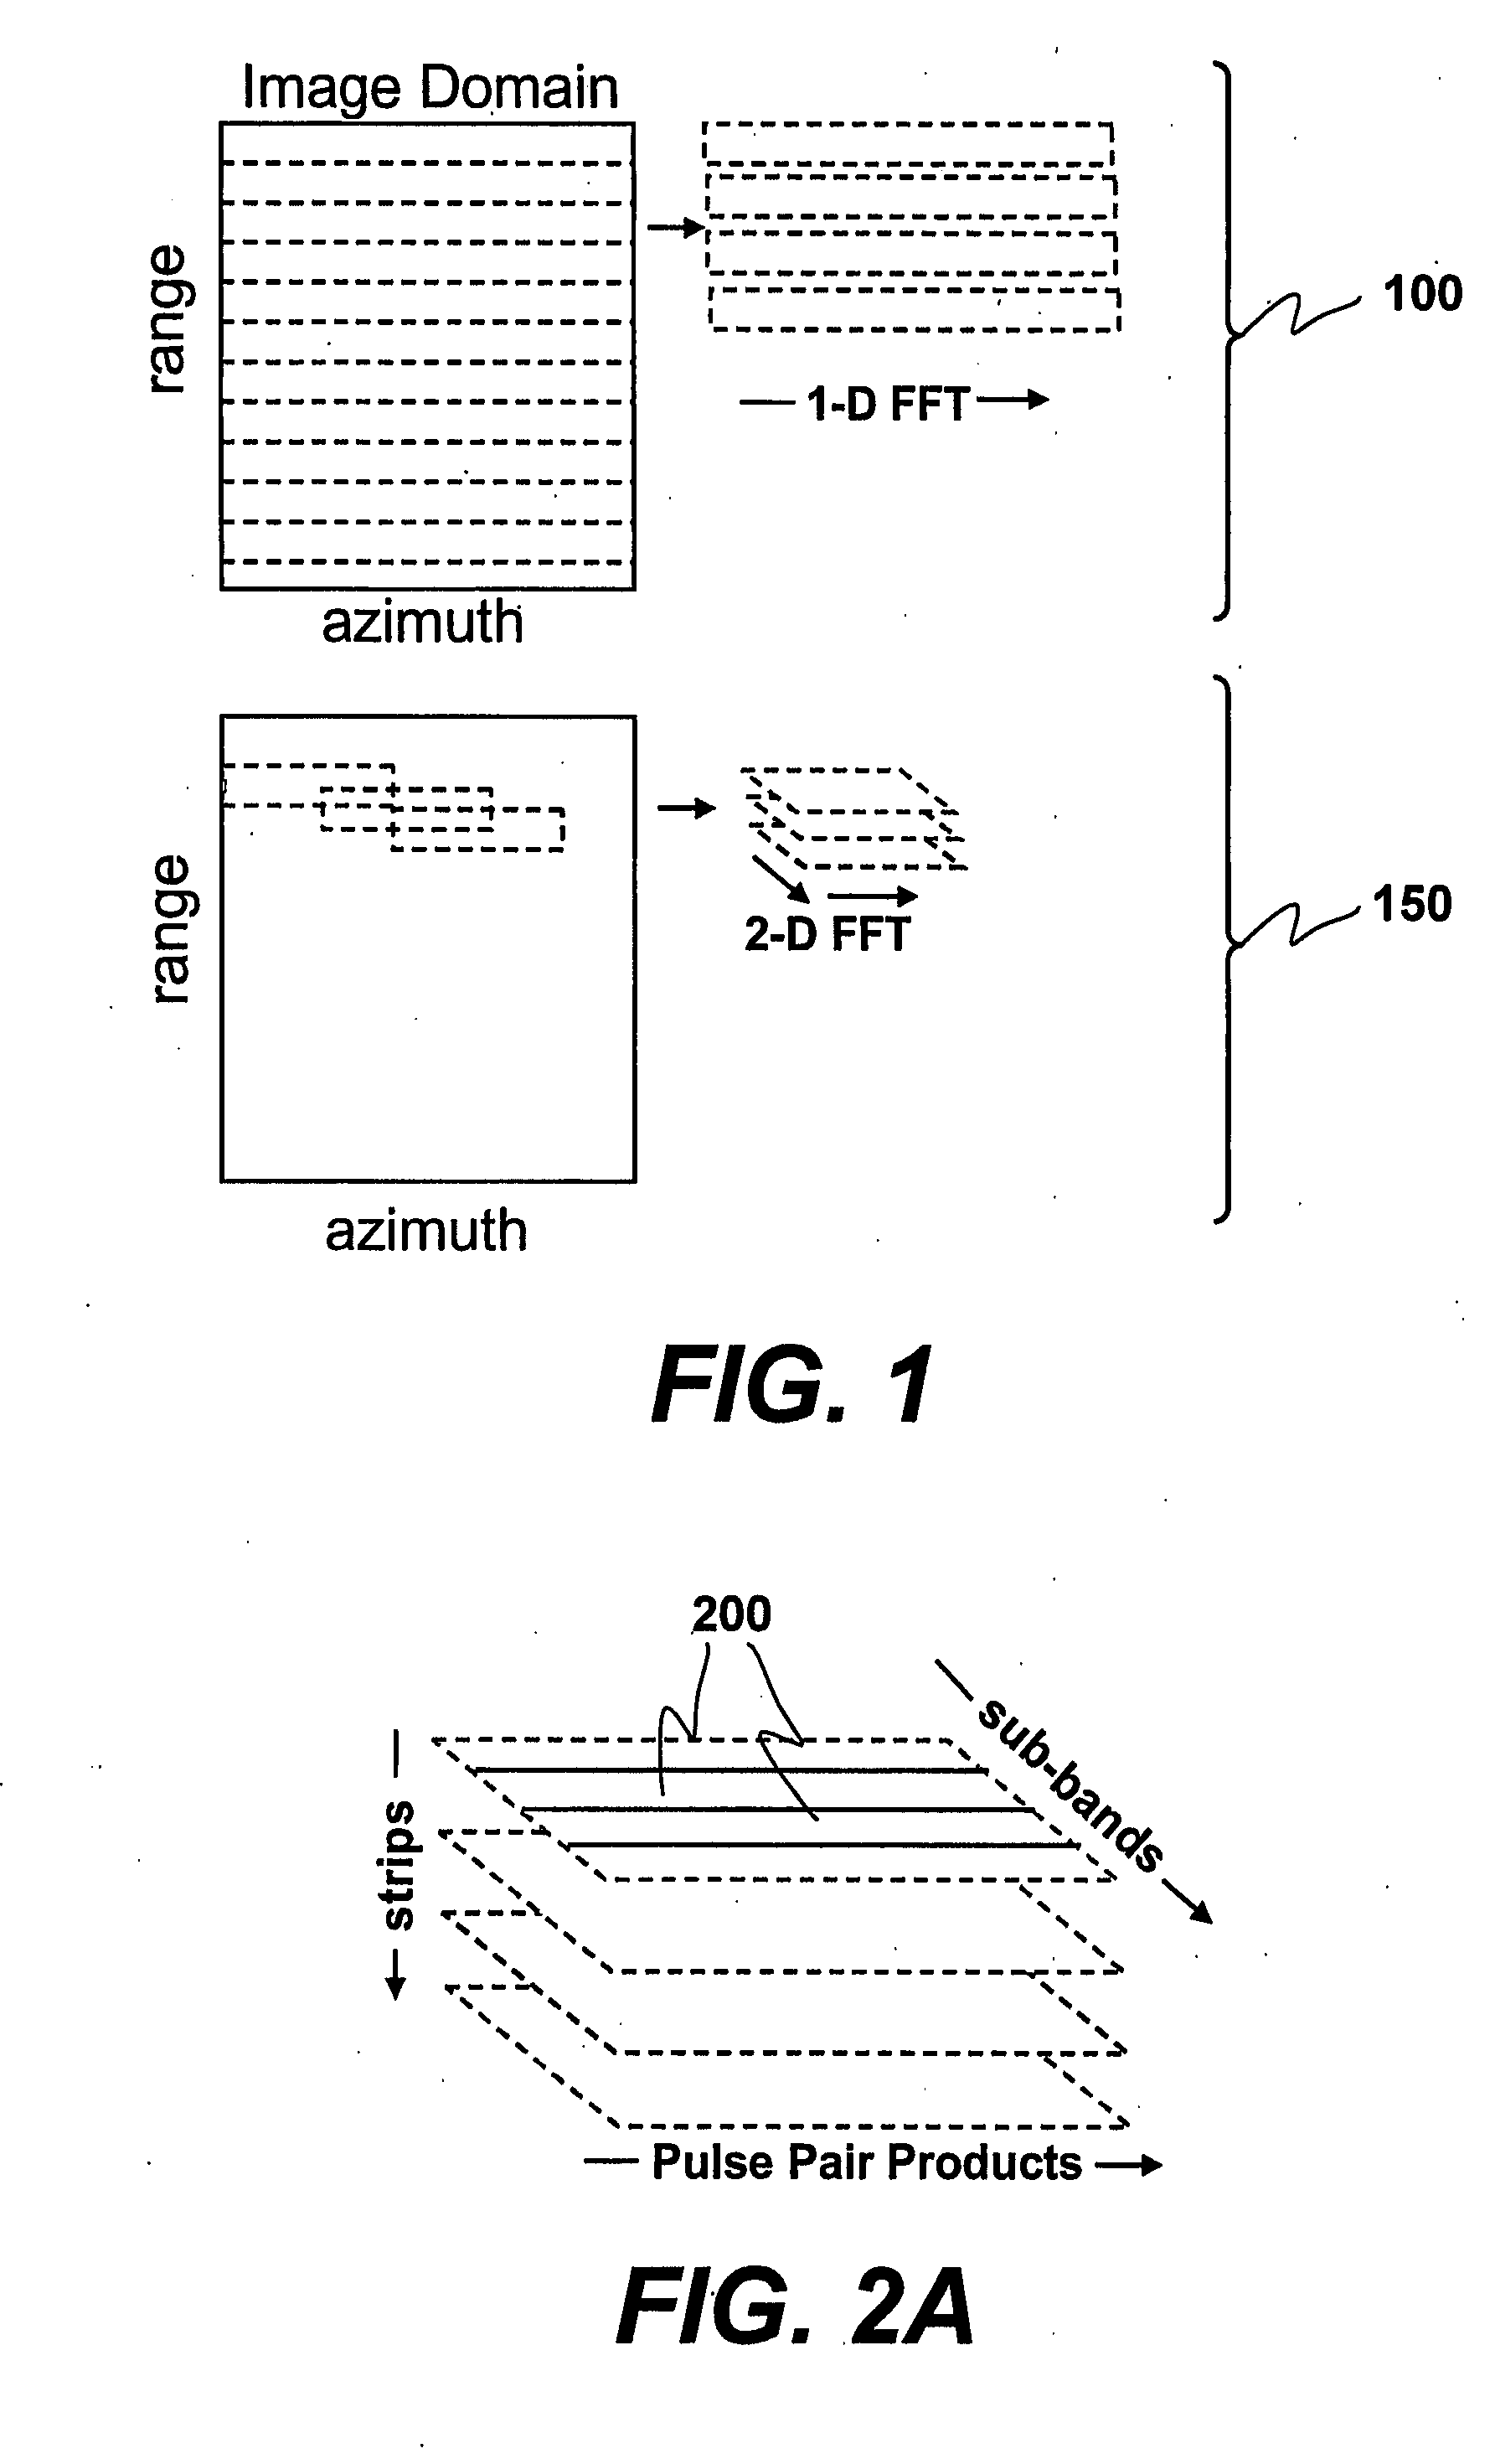 Methods for two-dimensional autofocus in high resolution radar systems